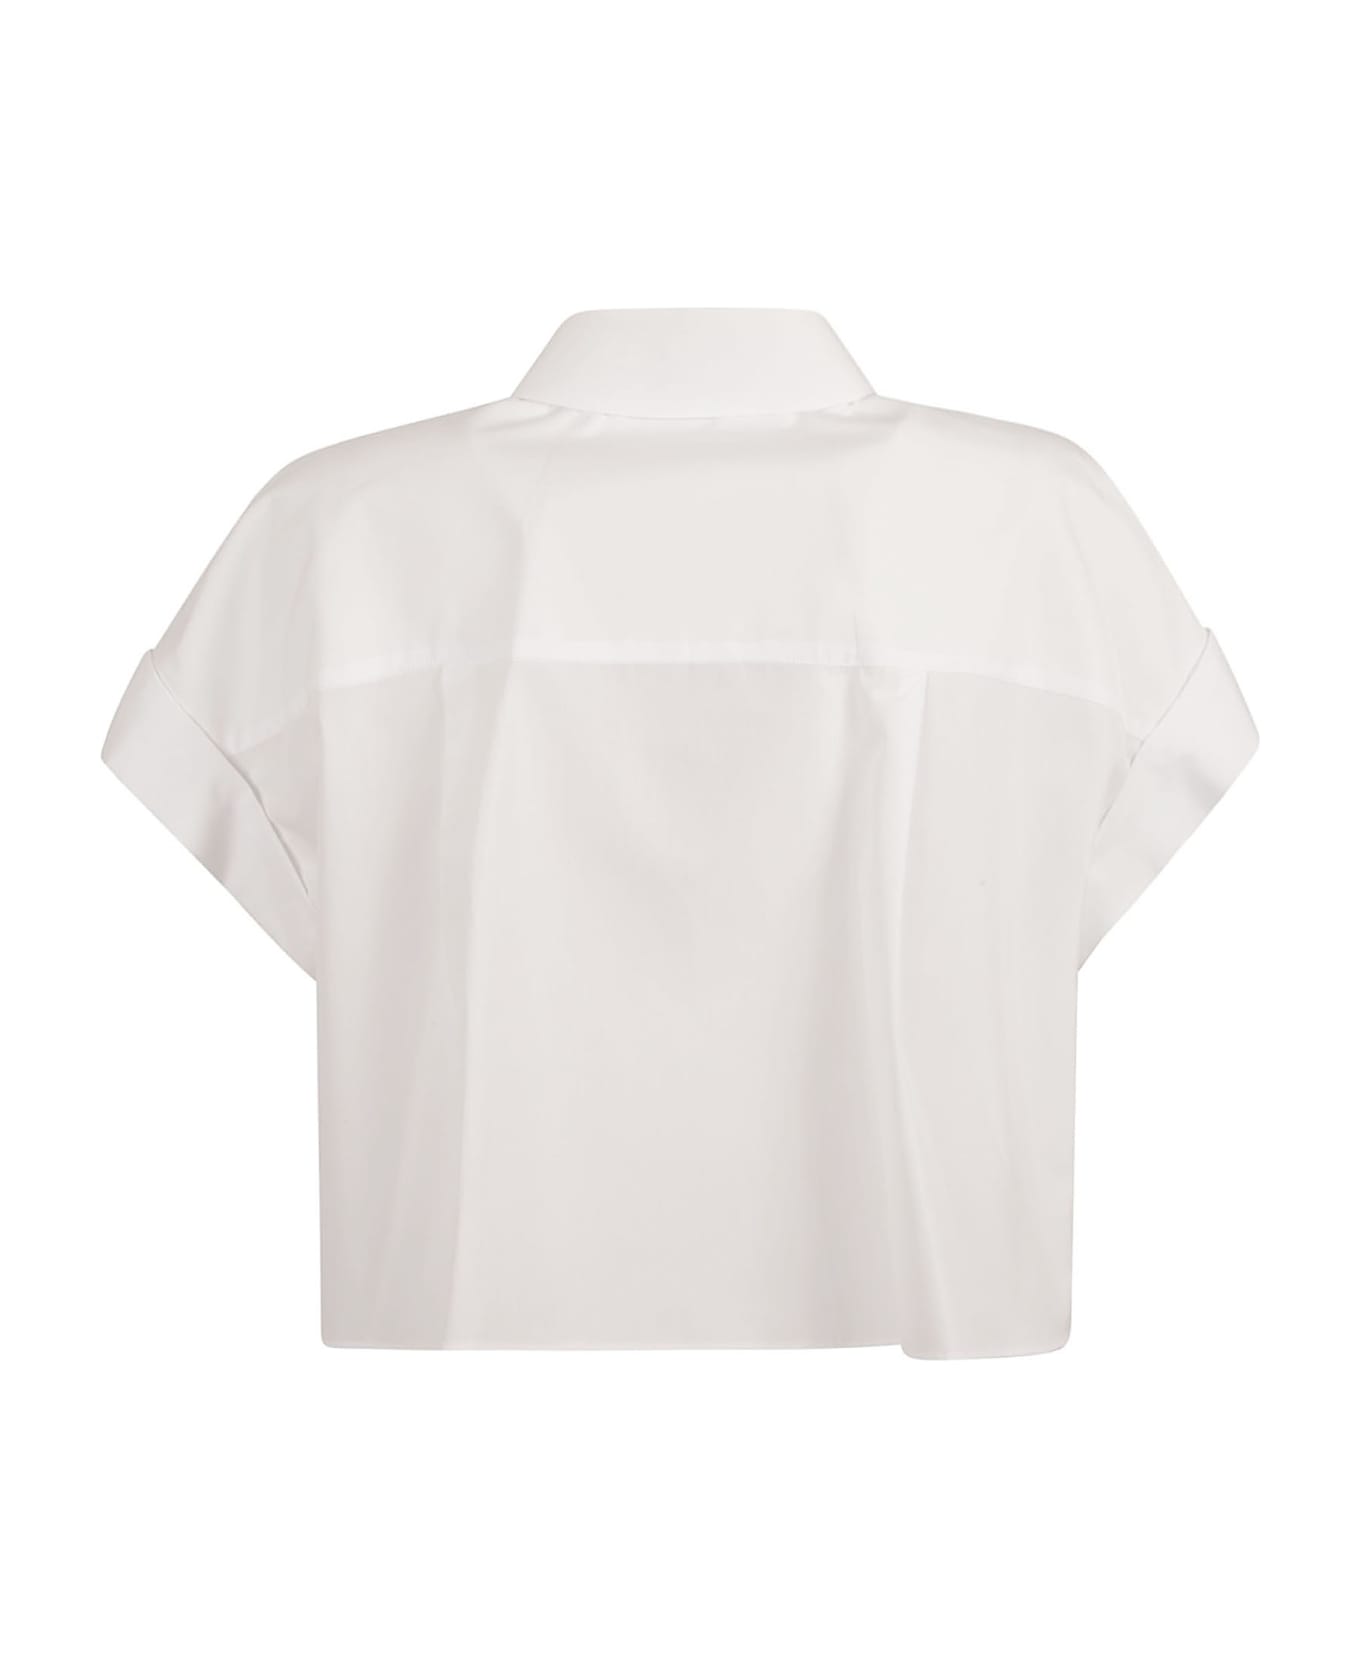 Alexander McQueen Cropped Oversized Shirt - Optical White